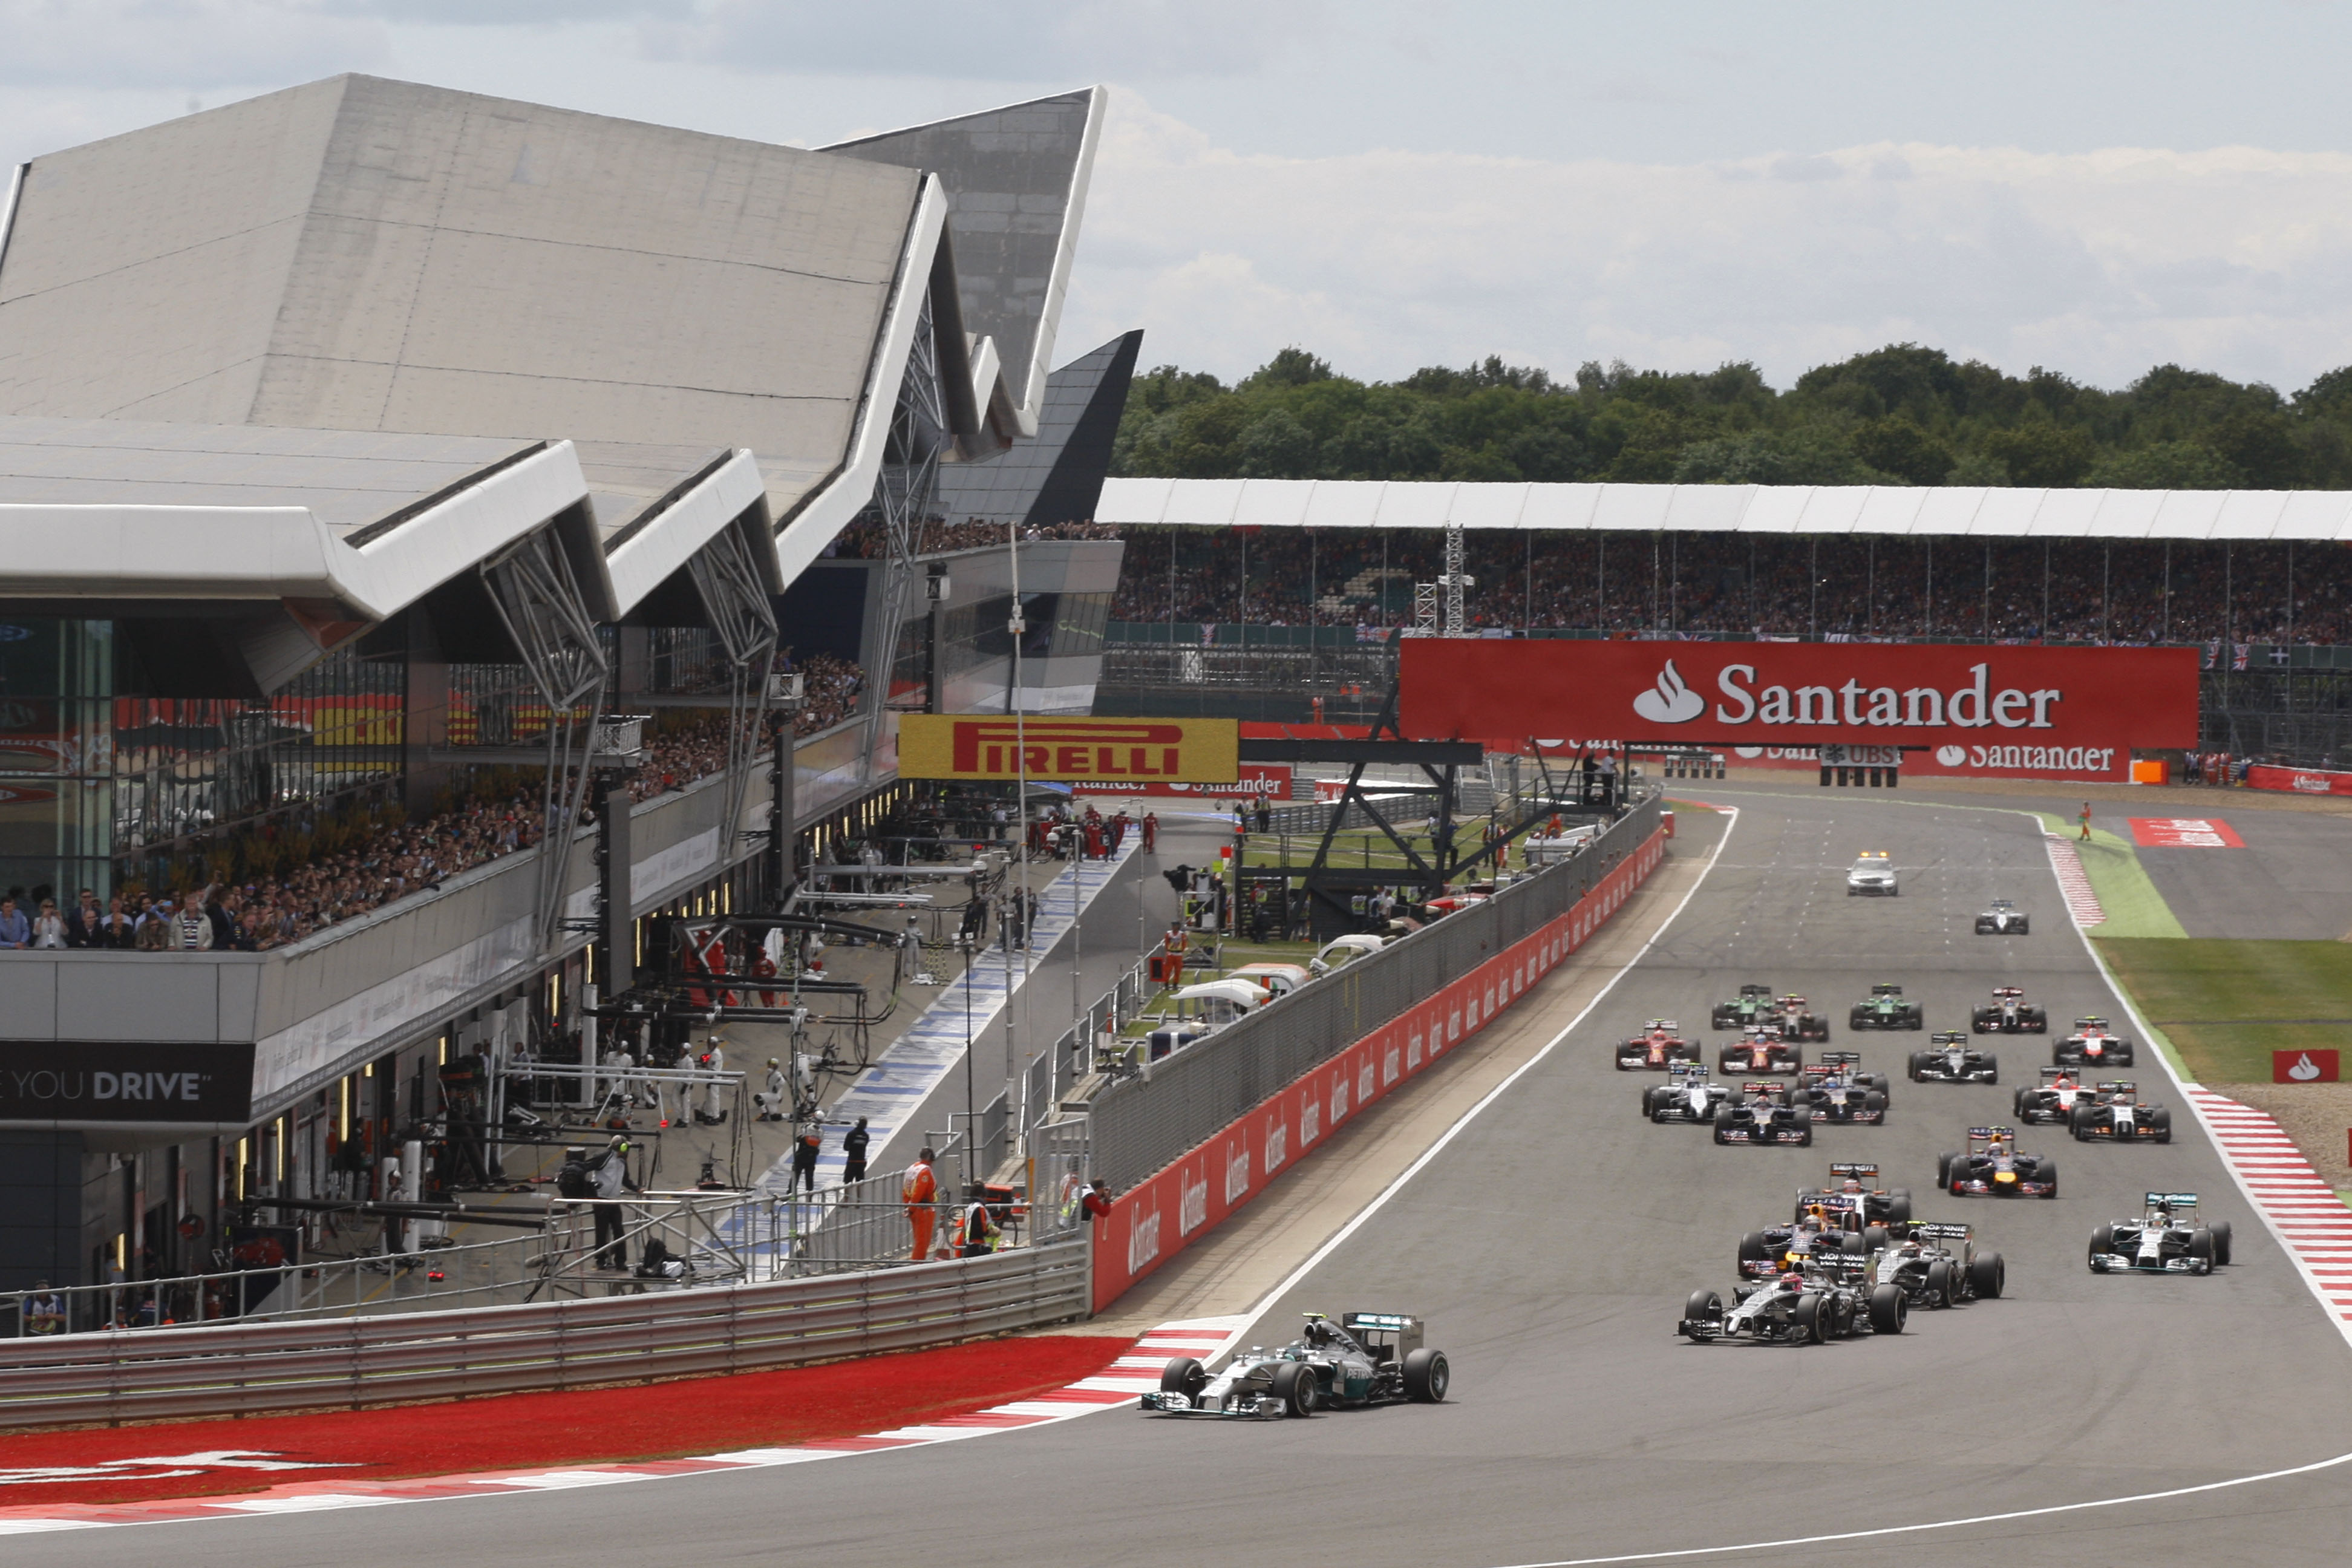 Lights out at the British Grand Prix and into the first corner at Silverstone